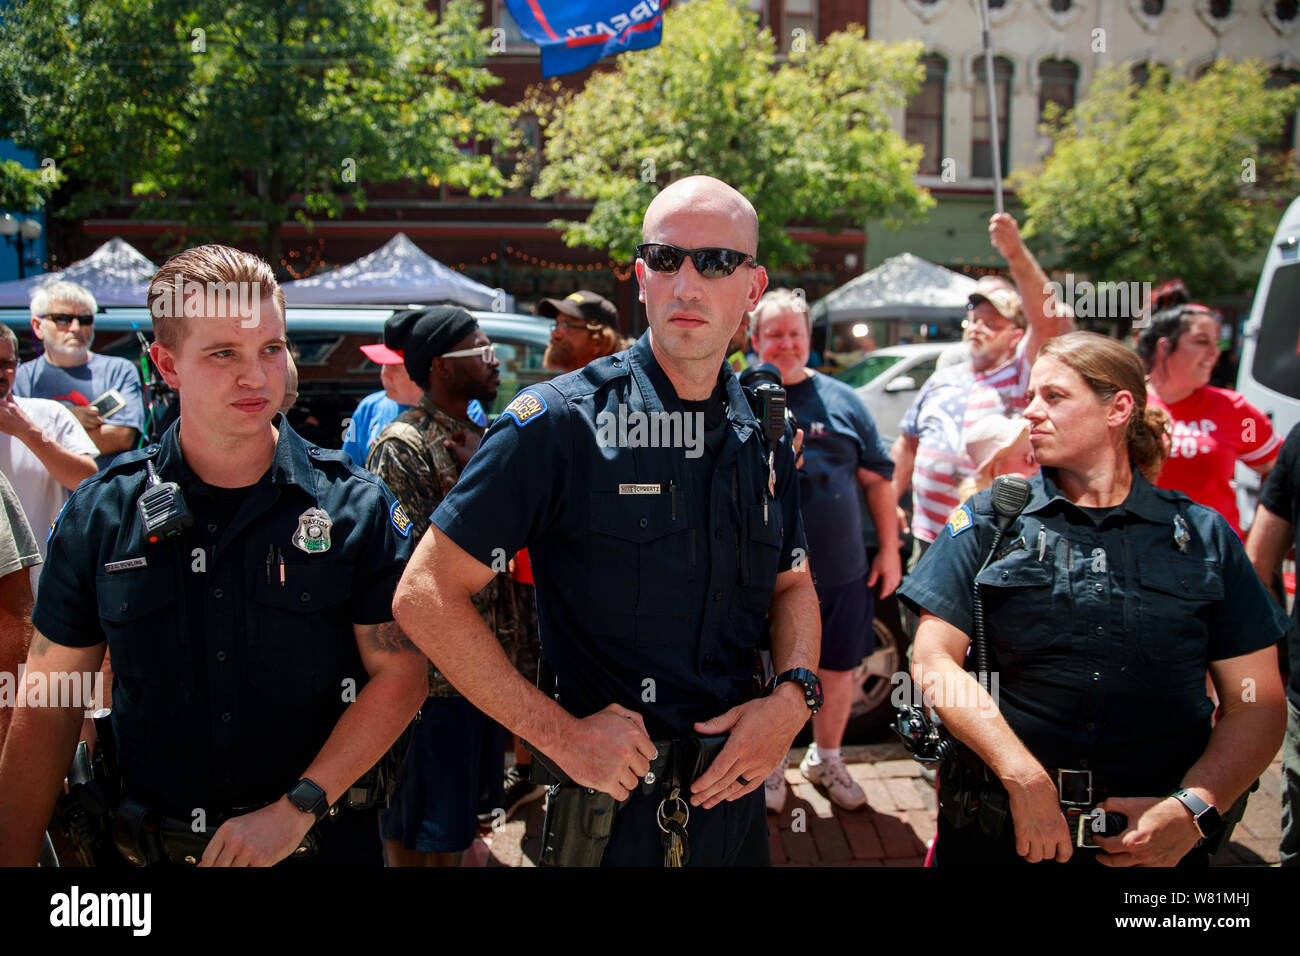 Police keep opposing sides apart as Trump supporters argue with protesters on on 5th Street at the site of Sunday morning's mass shooting that left 9 dead, and 27 wounded, Wednesday, August 7, 2019 in Dayton, Ohio. Trump visited a nearby hospital but did not visit the site of the shooting before flying to El Paso, Texas, which was also the site of a mass shooting. Stock Photo